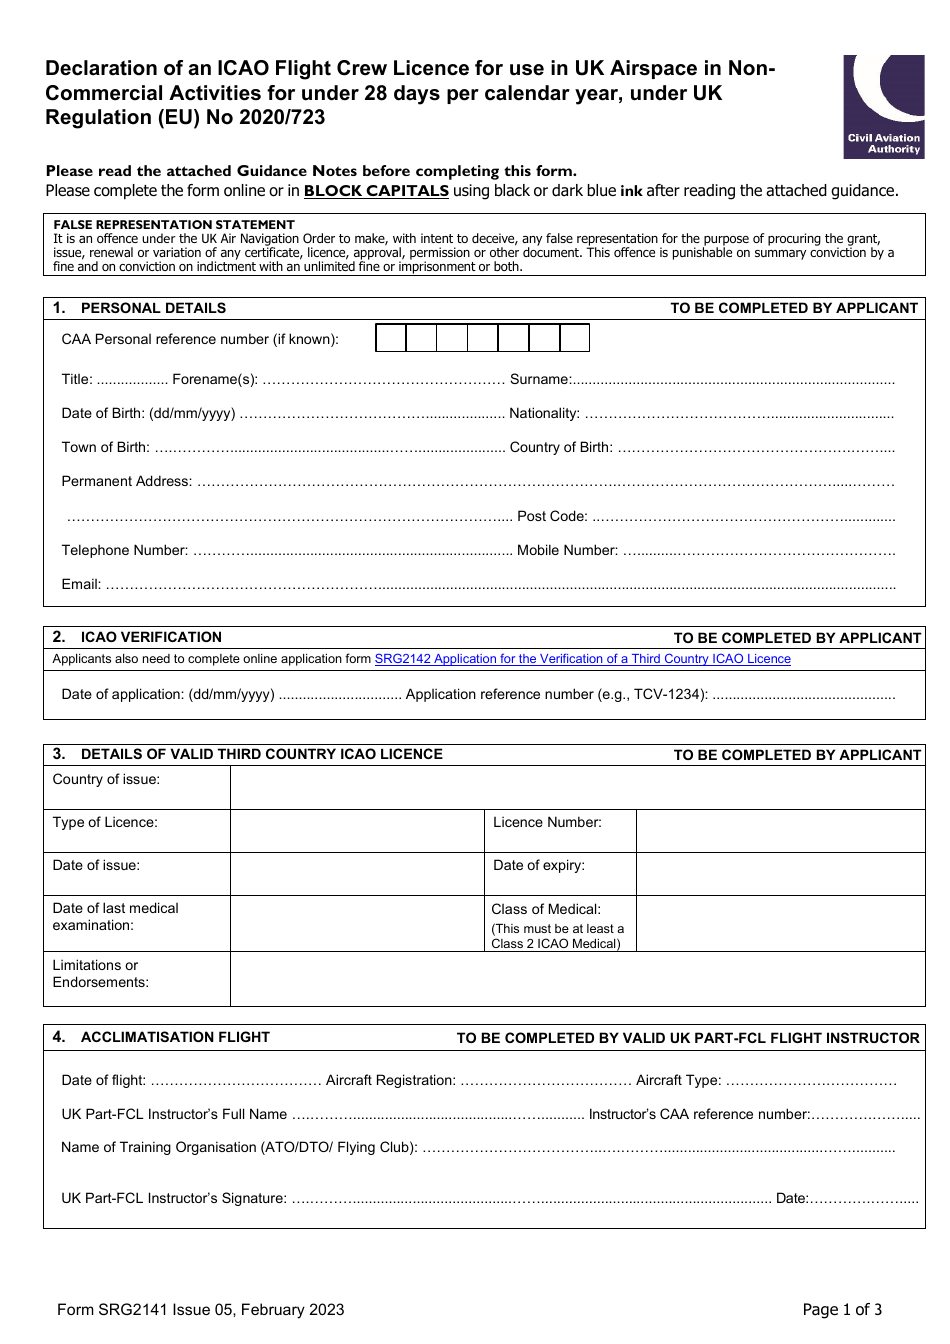 Form SRG2141 Declaration of an Icao Flight Crew Licence for Use in UK Airspace in Noncommercial Activities for Under 28 Days Per Calendar Year, Under UK Regulation (Eu) No 2020 / 723 - United Kingdom, Page 1